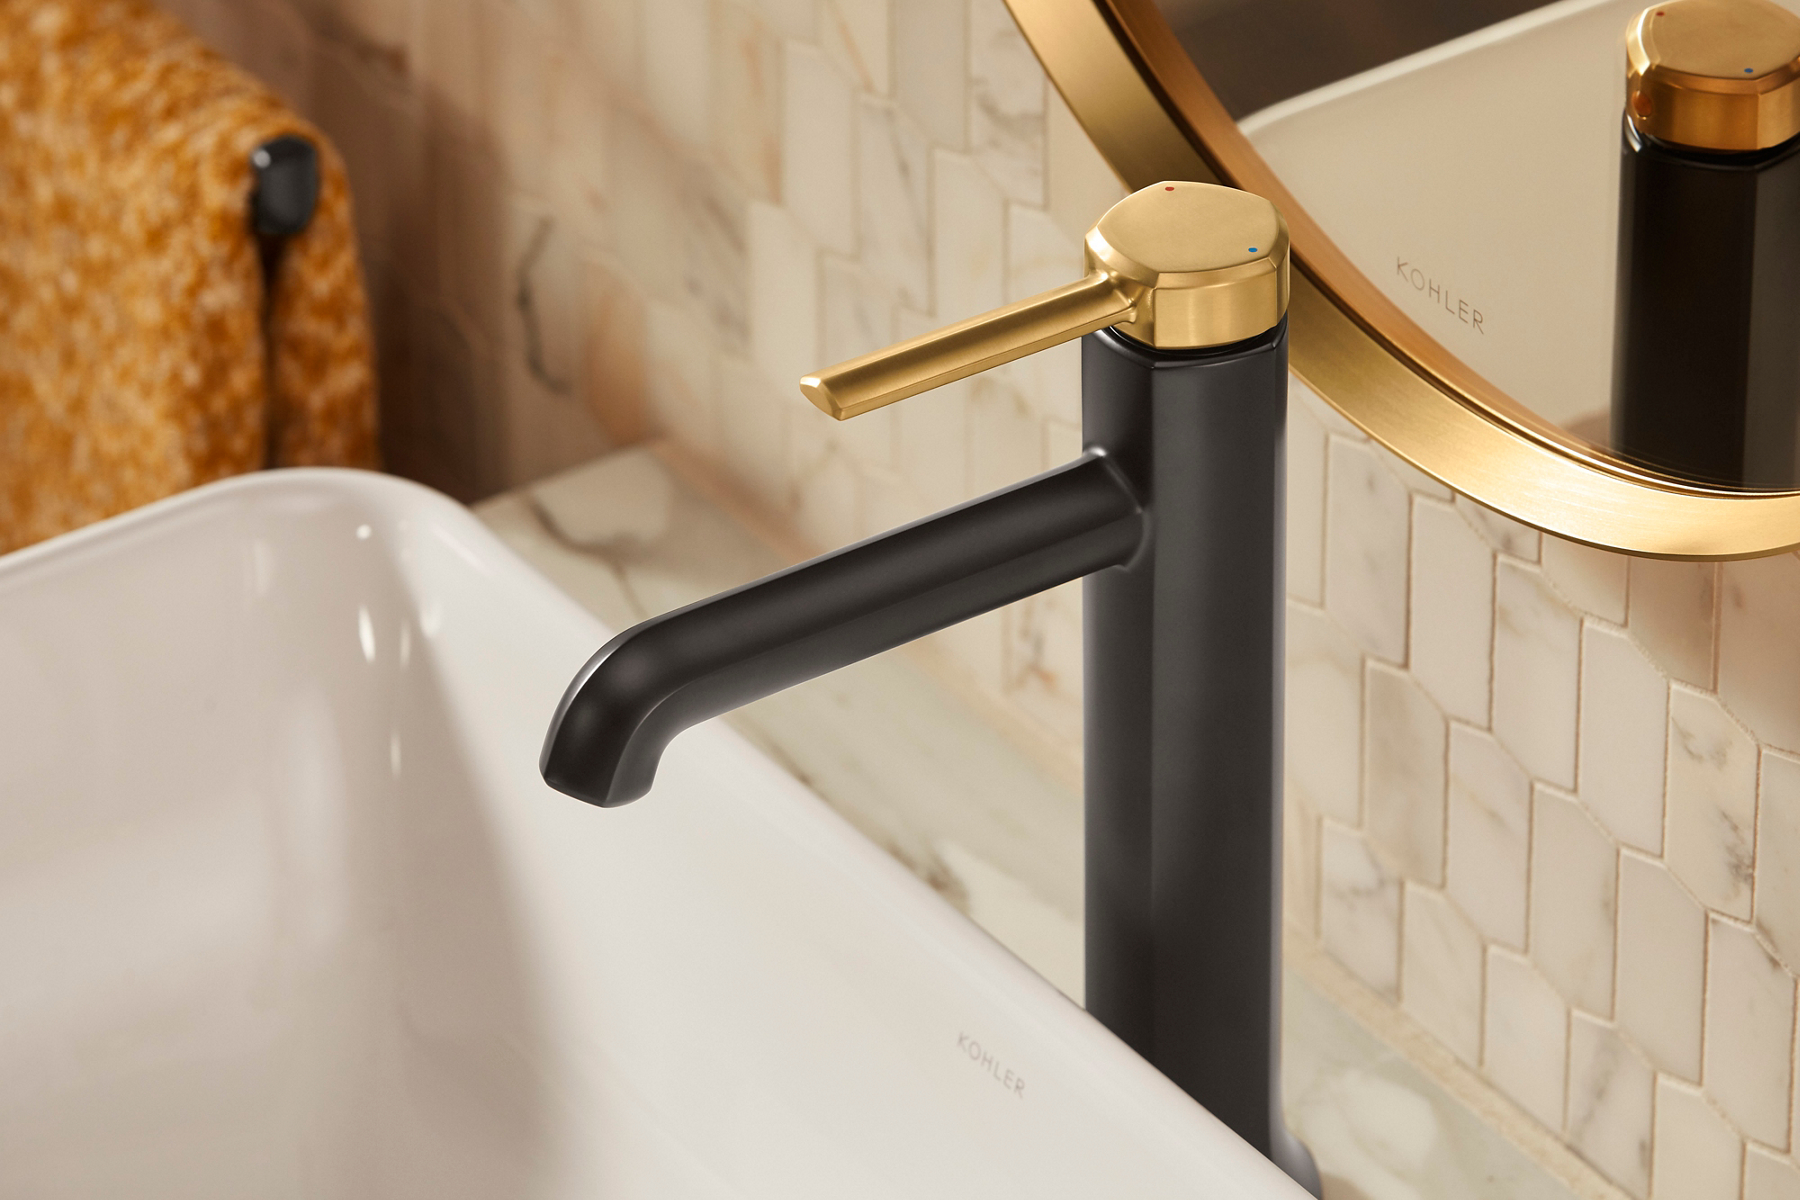 A detail view of a black KOHLER faucet with gold single lever handle and a white rectangle vessel sink.